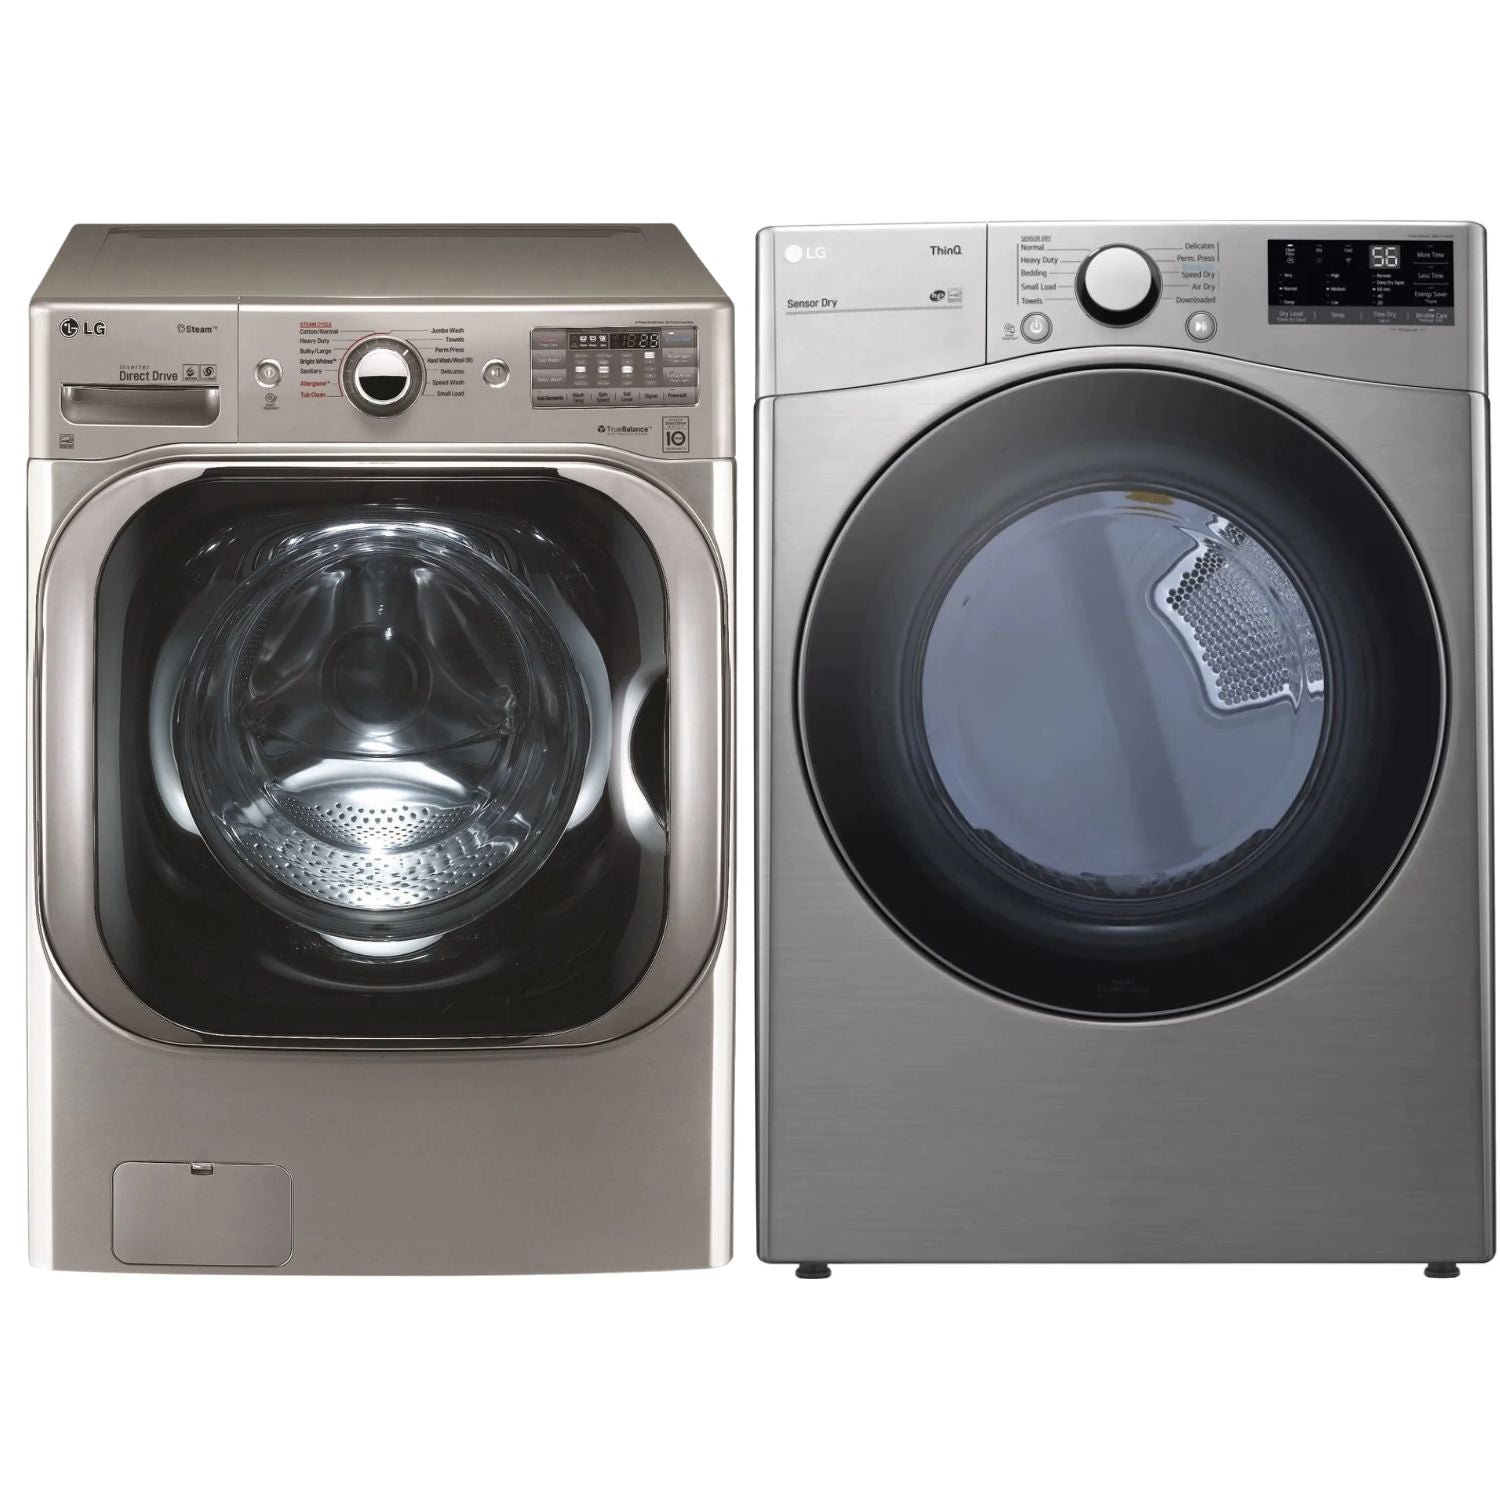 LG 4.5 cu. ft. Top Load Washer - White - WT7100CW